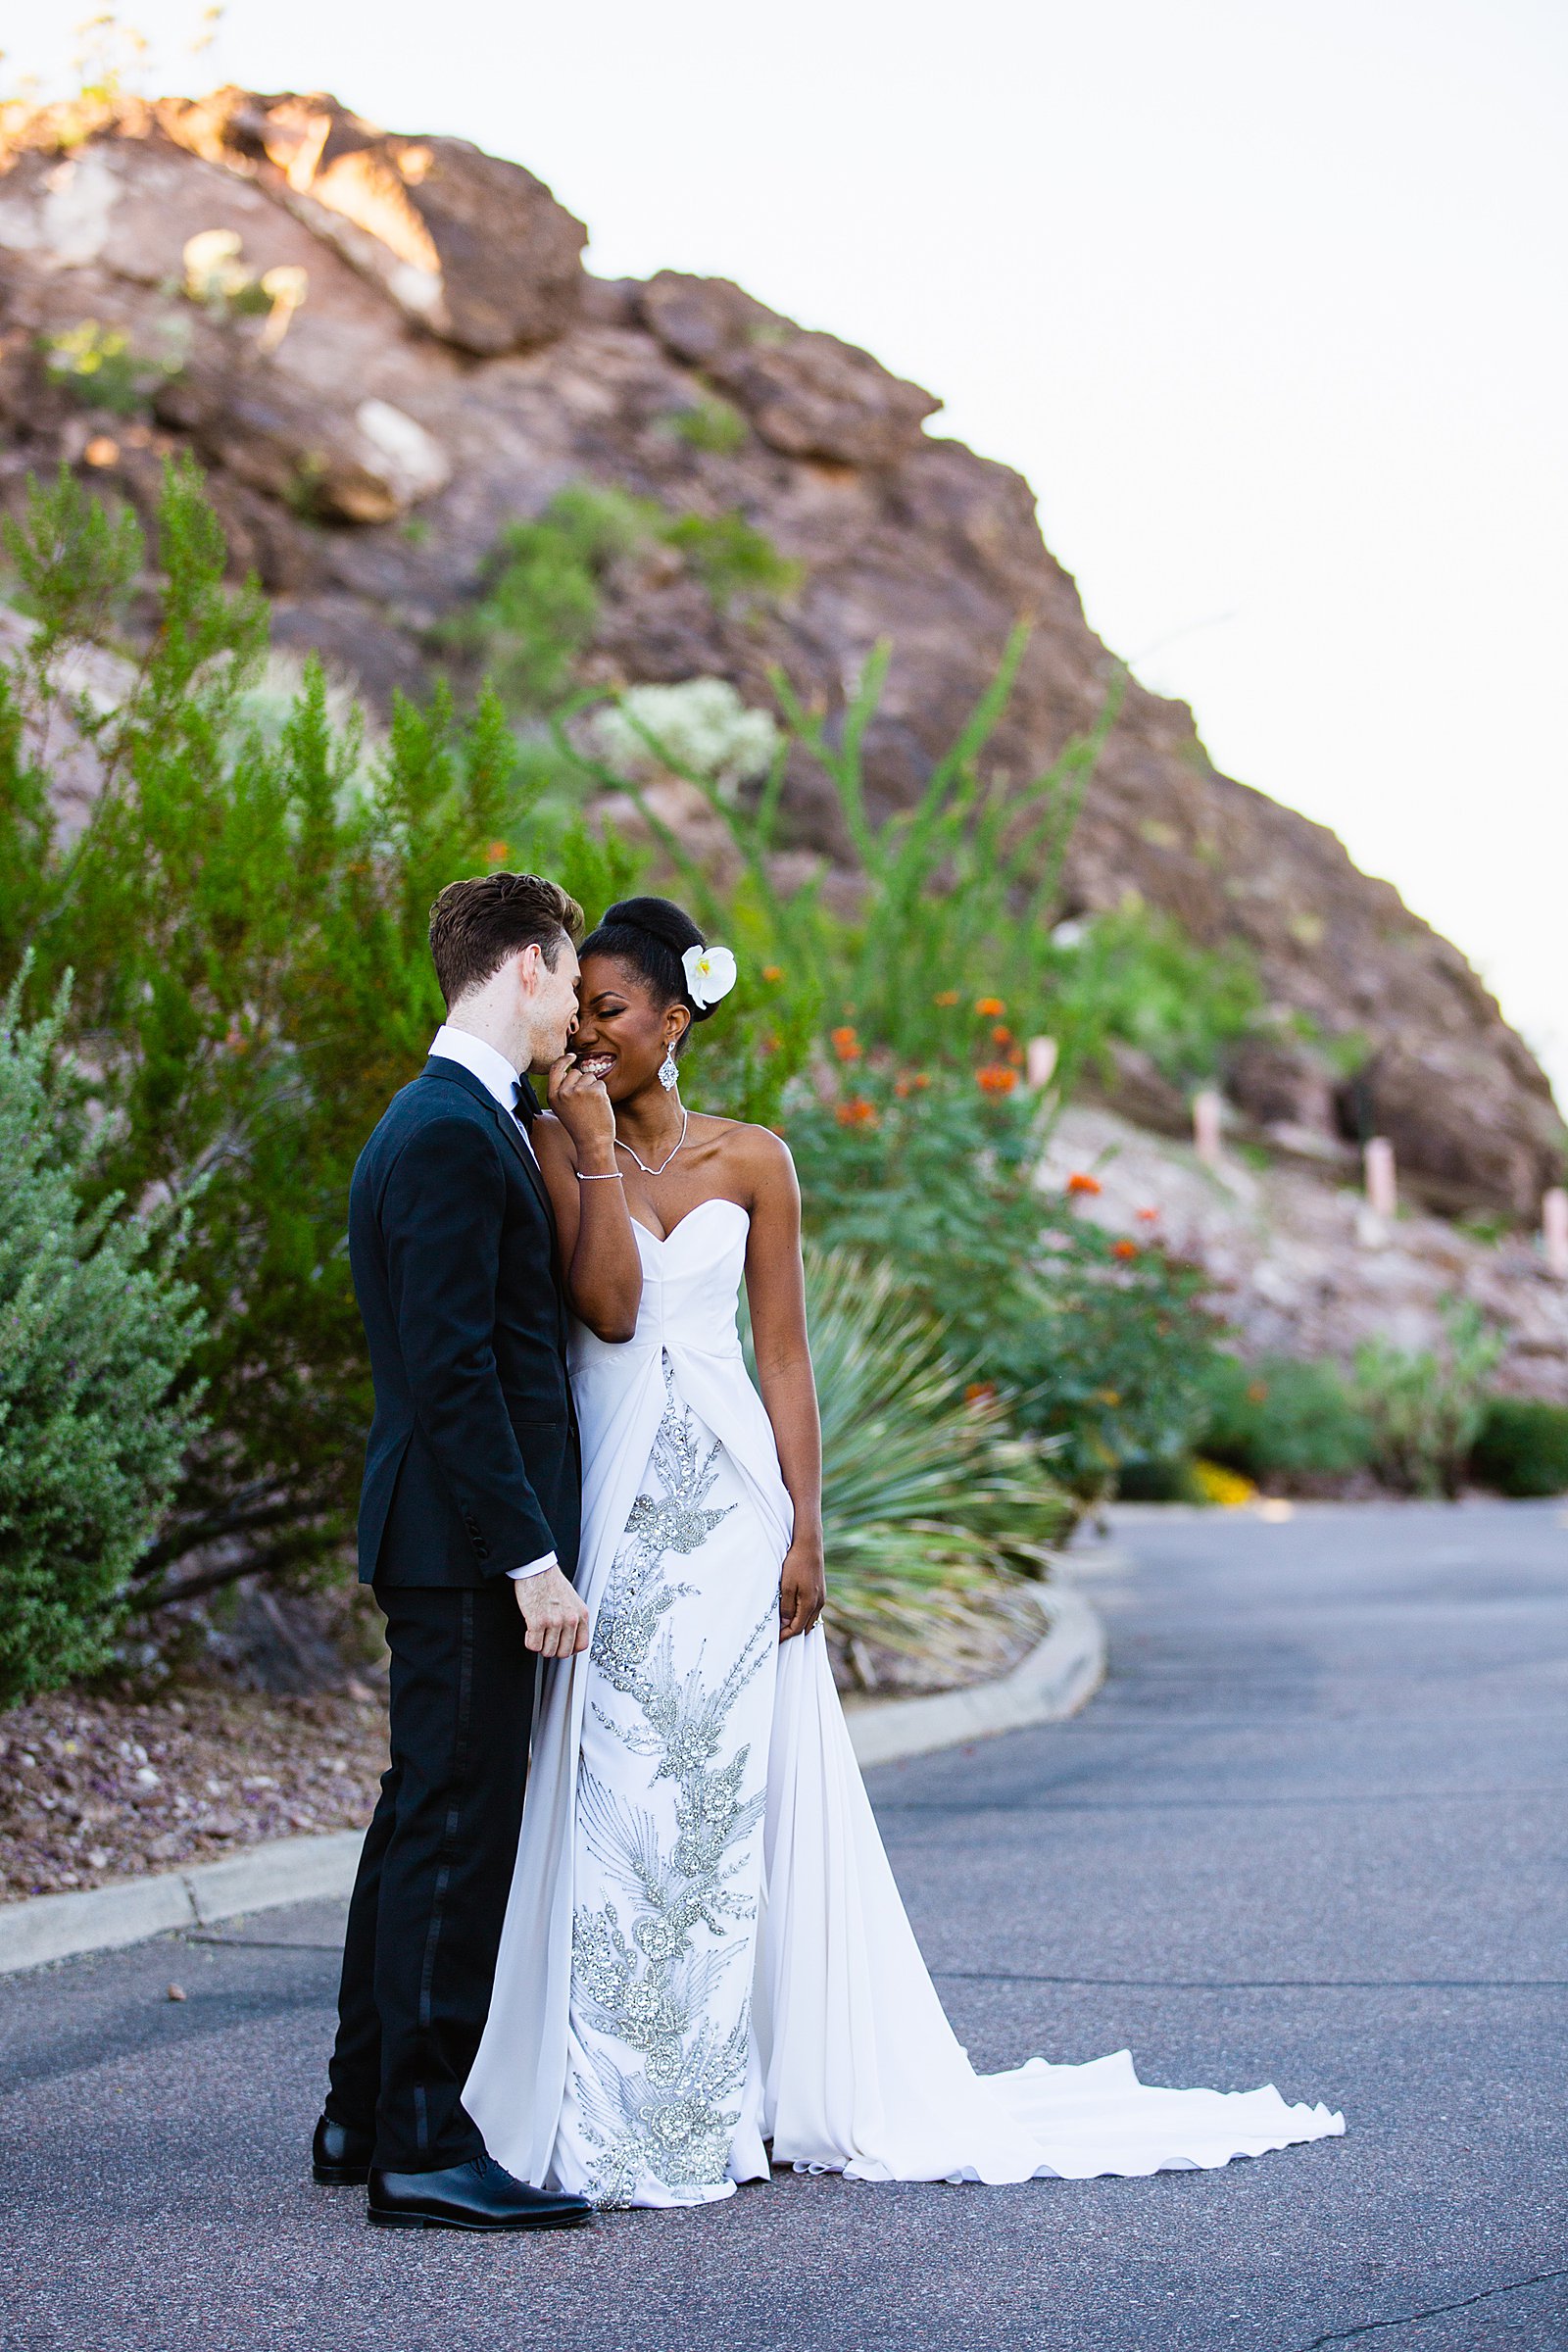 Bride and Groom pose for their multicultural wedding by Phoenix wedding photographer PMA Photography.